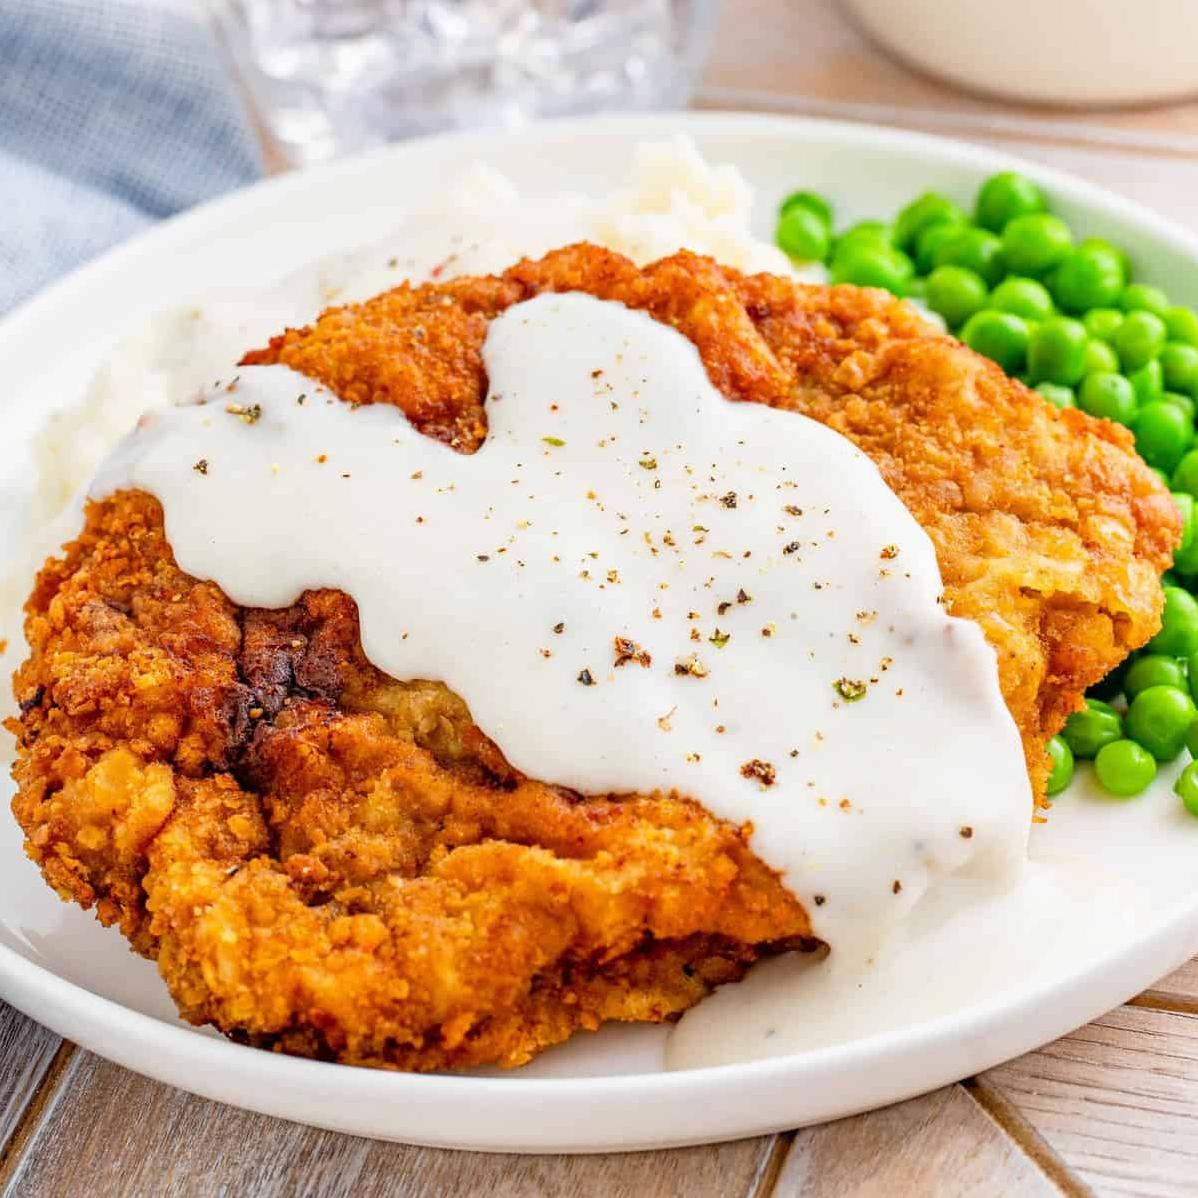  The breading on these chicken fried steaks will have you coming back for seconds (and maybe even thirds!).